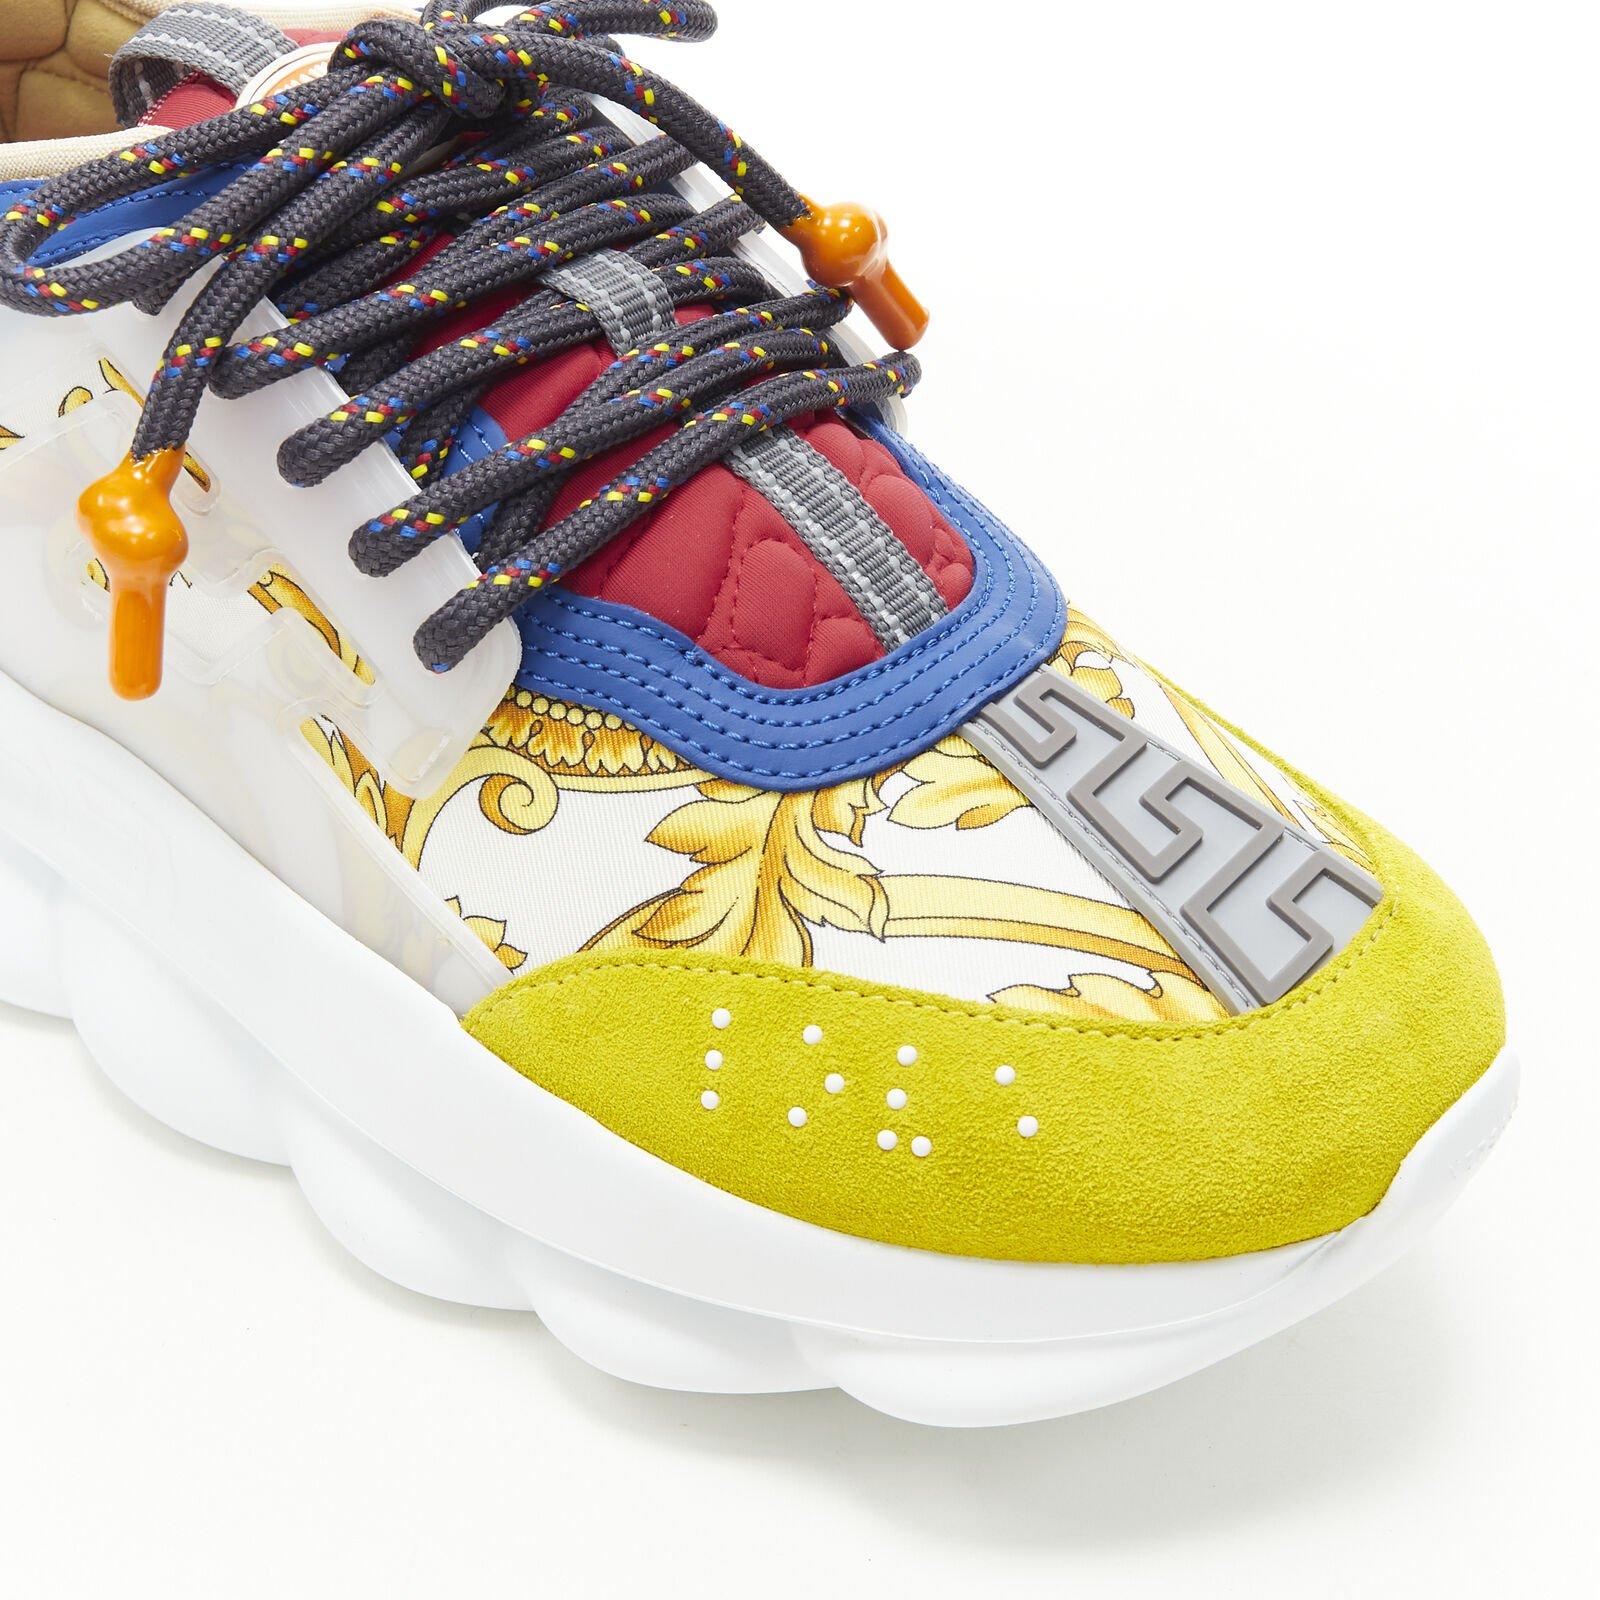 VERSACE Chain Reaction gold barocco twill yellow blue suede sneaker EU40 US7 4